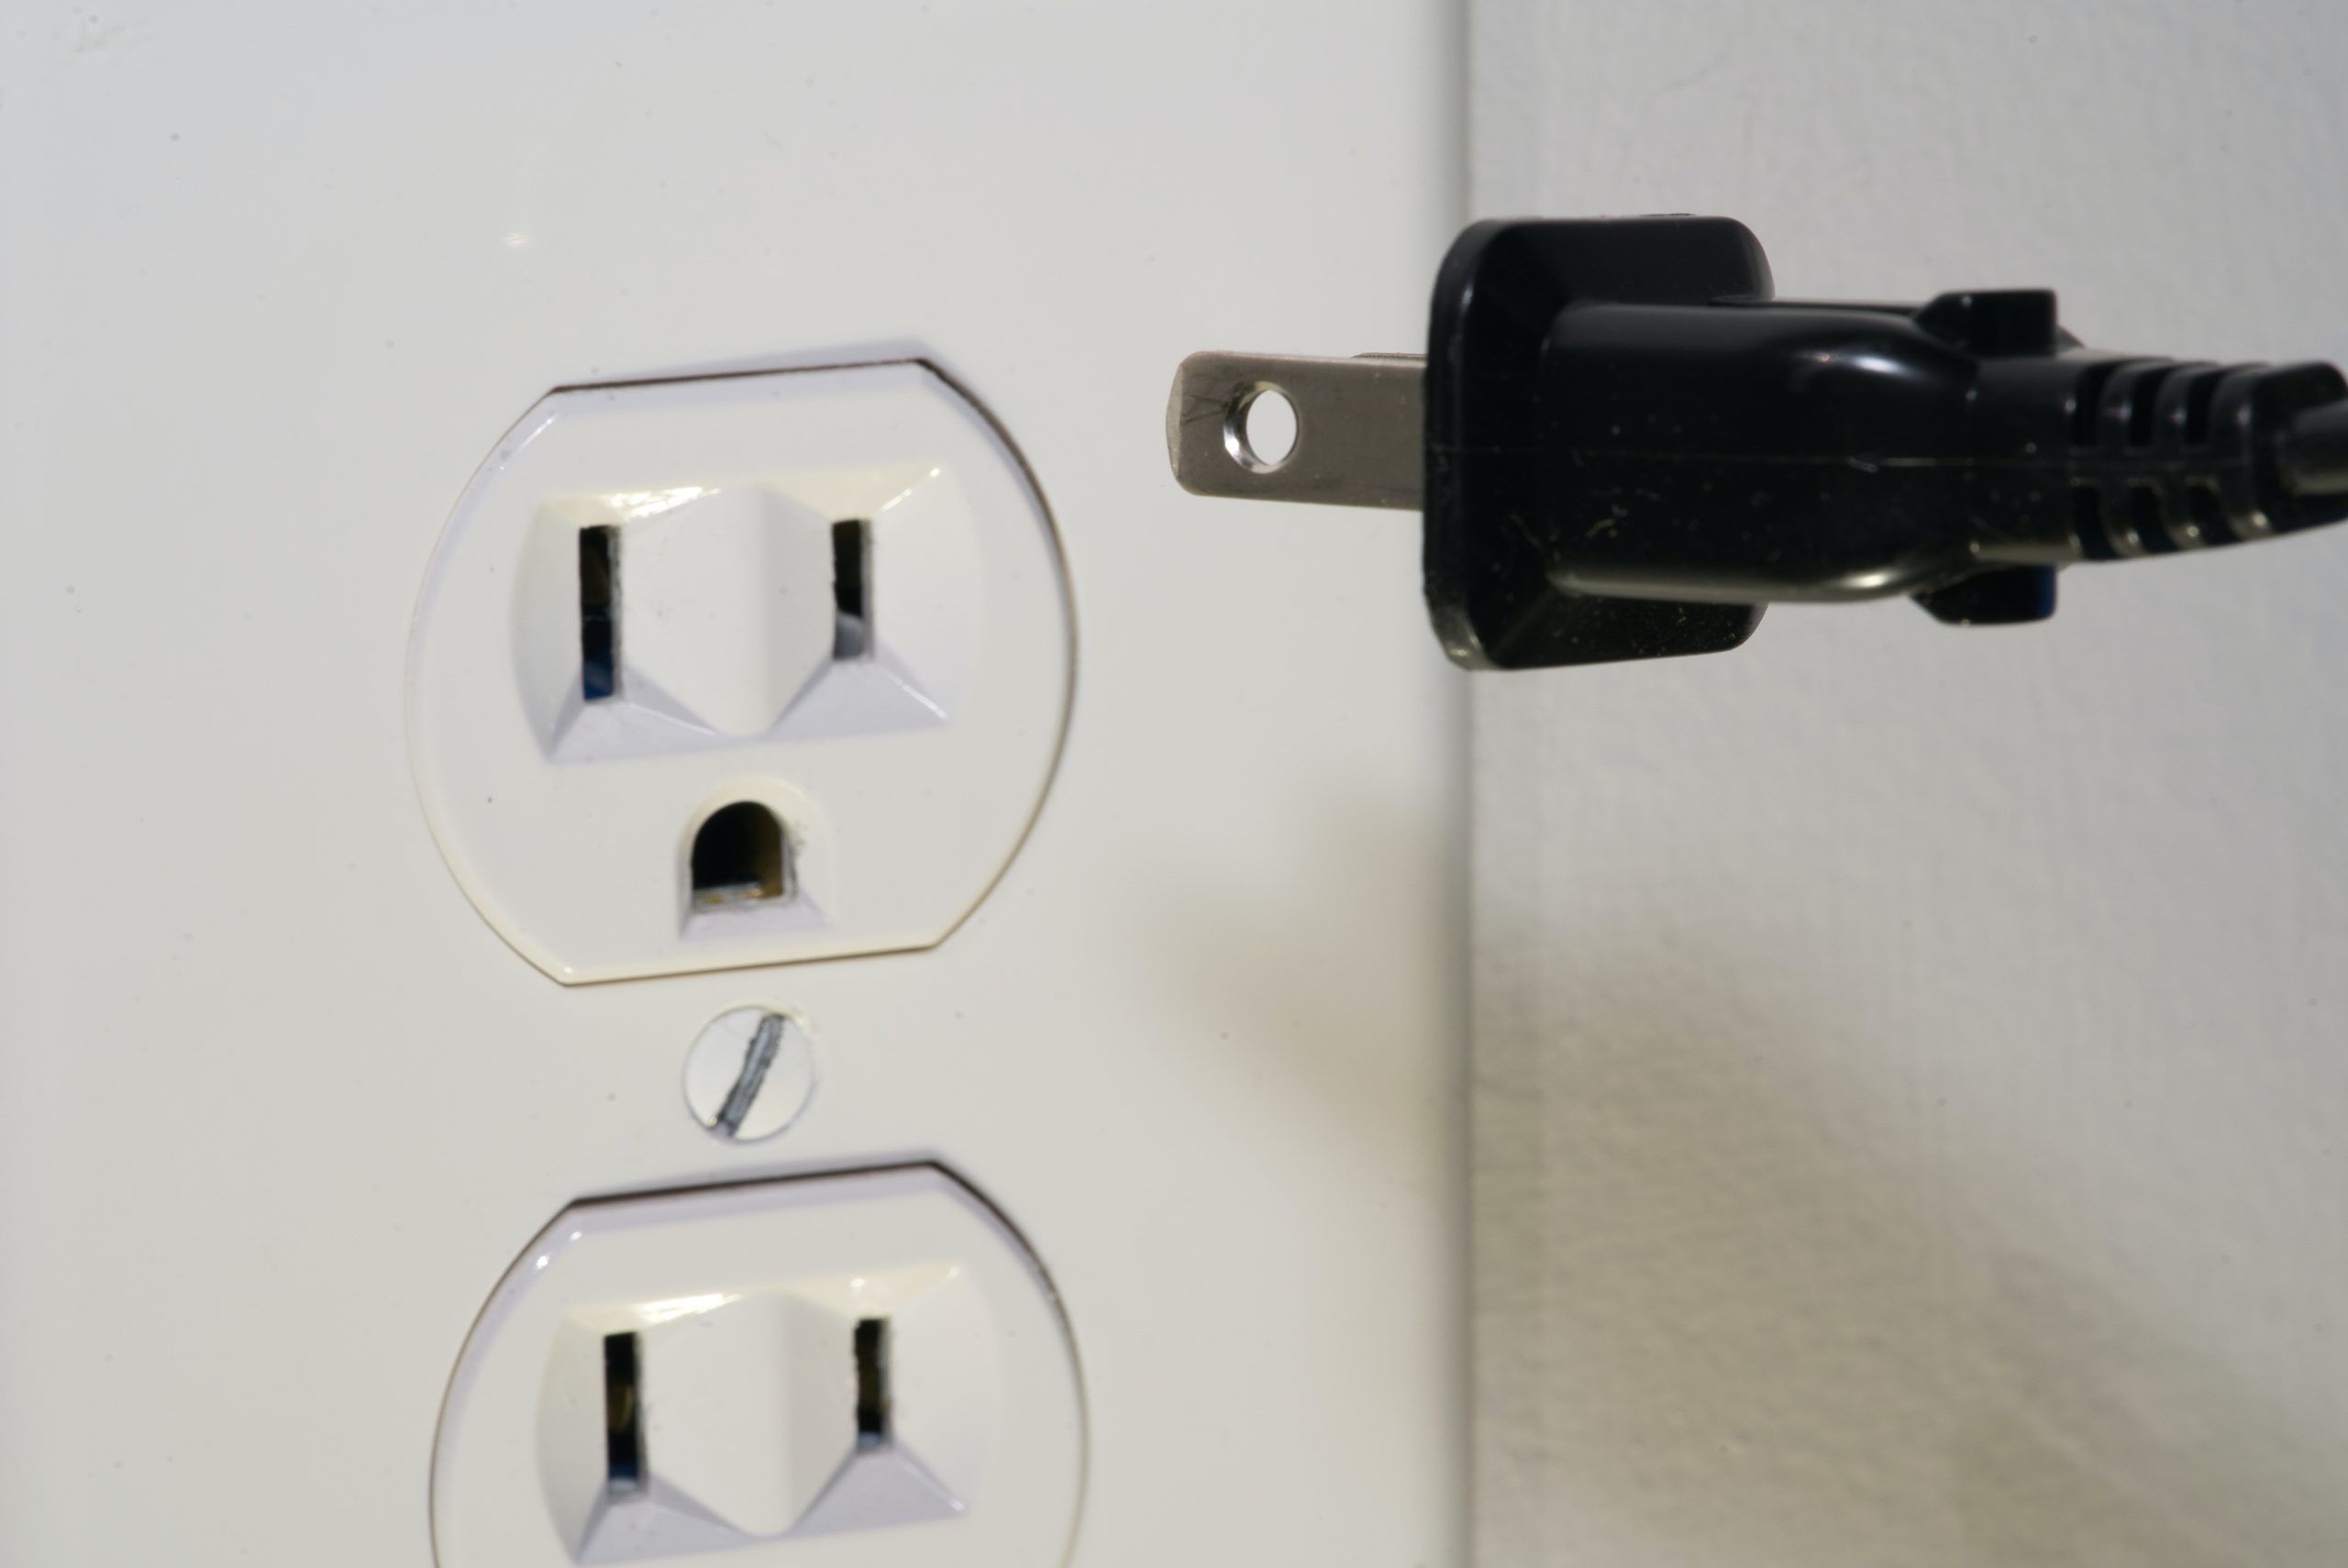 faulty outlets? Call an electrician